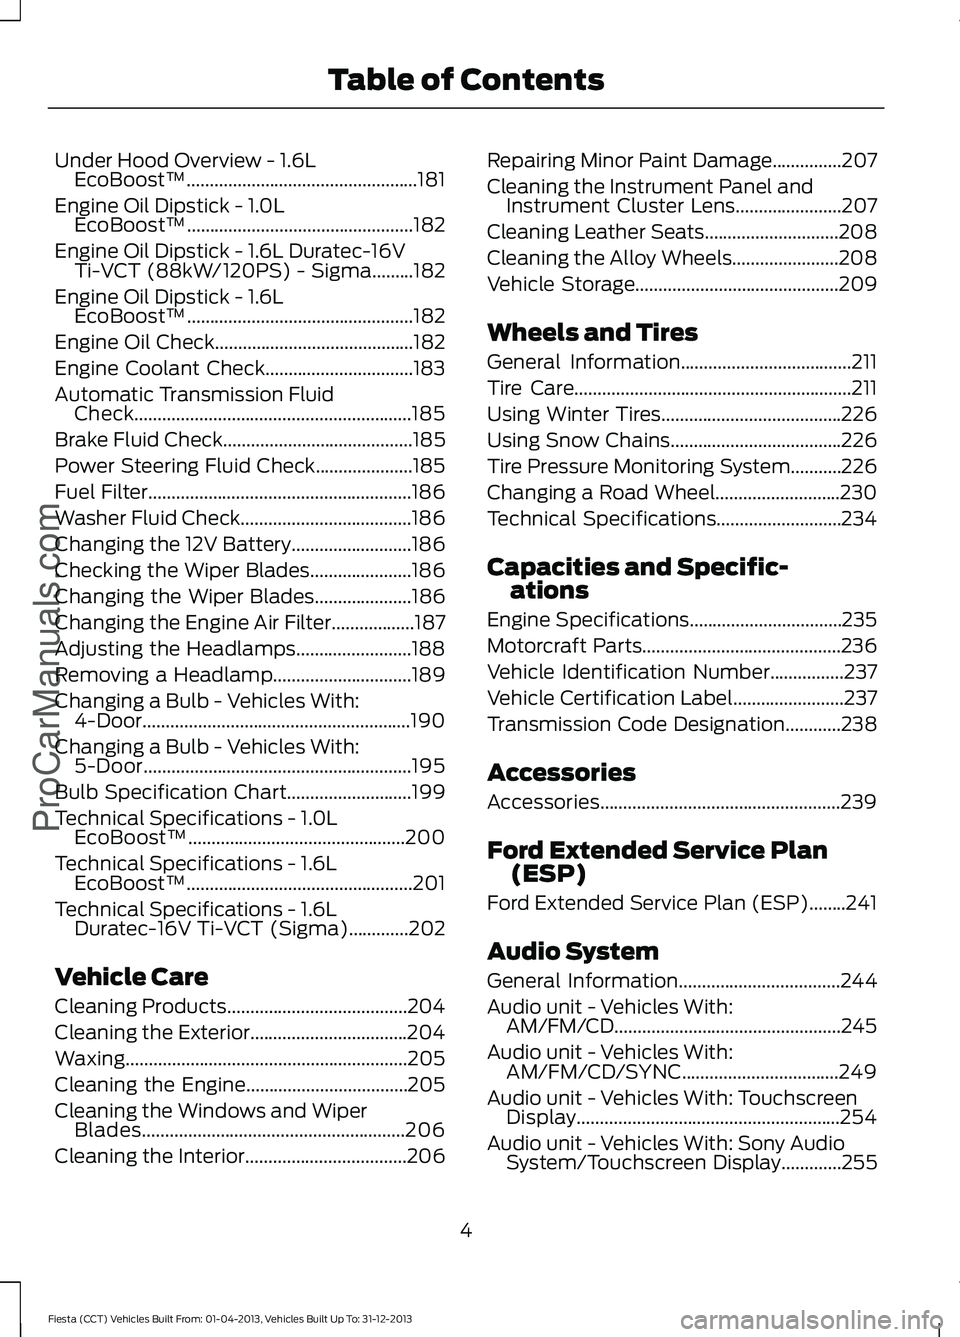 FORD FIESTA 2014  Owners Manual Under Hood Overview - 1.6L
EcoBoost™..................................................181
Engine Oil Dipstick - 1.0L EcoBoost™.................................................182
Engine Oil Dipsti